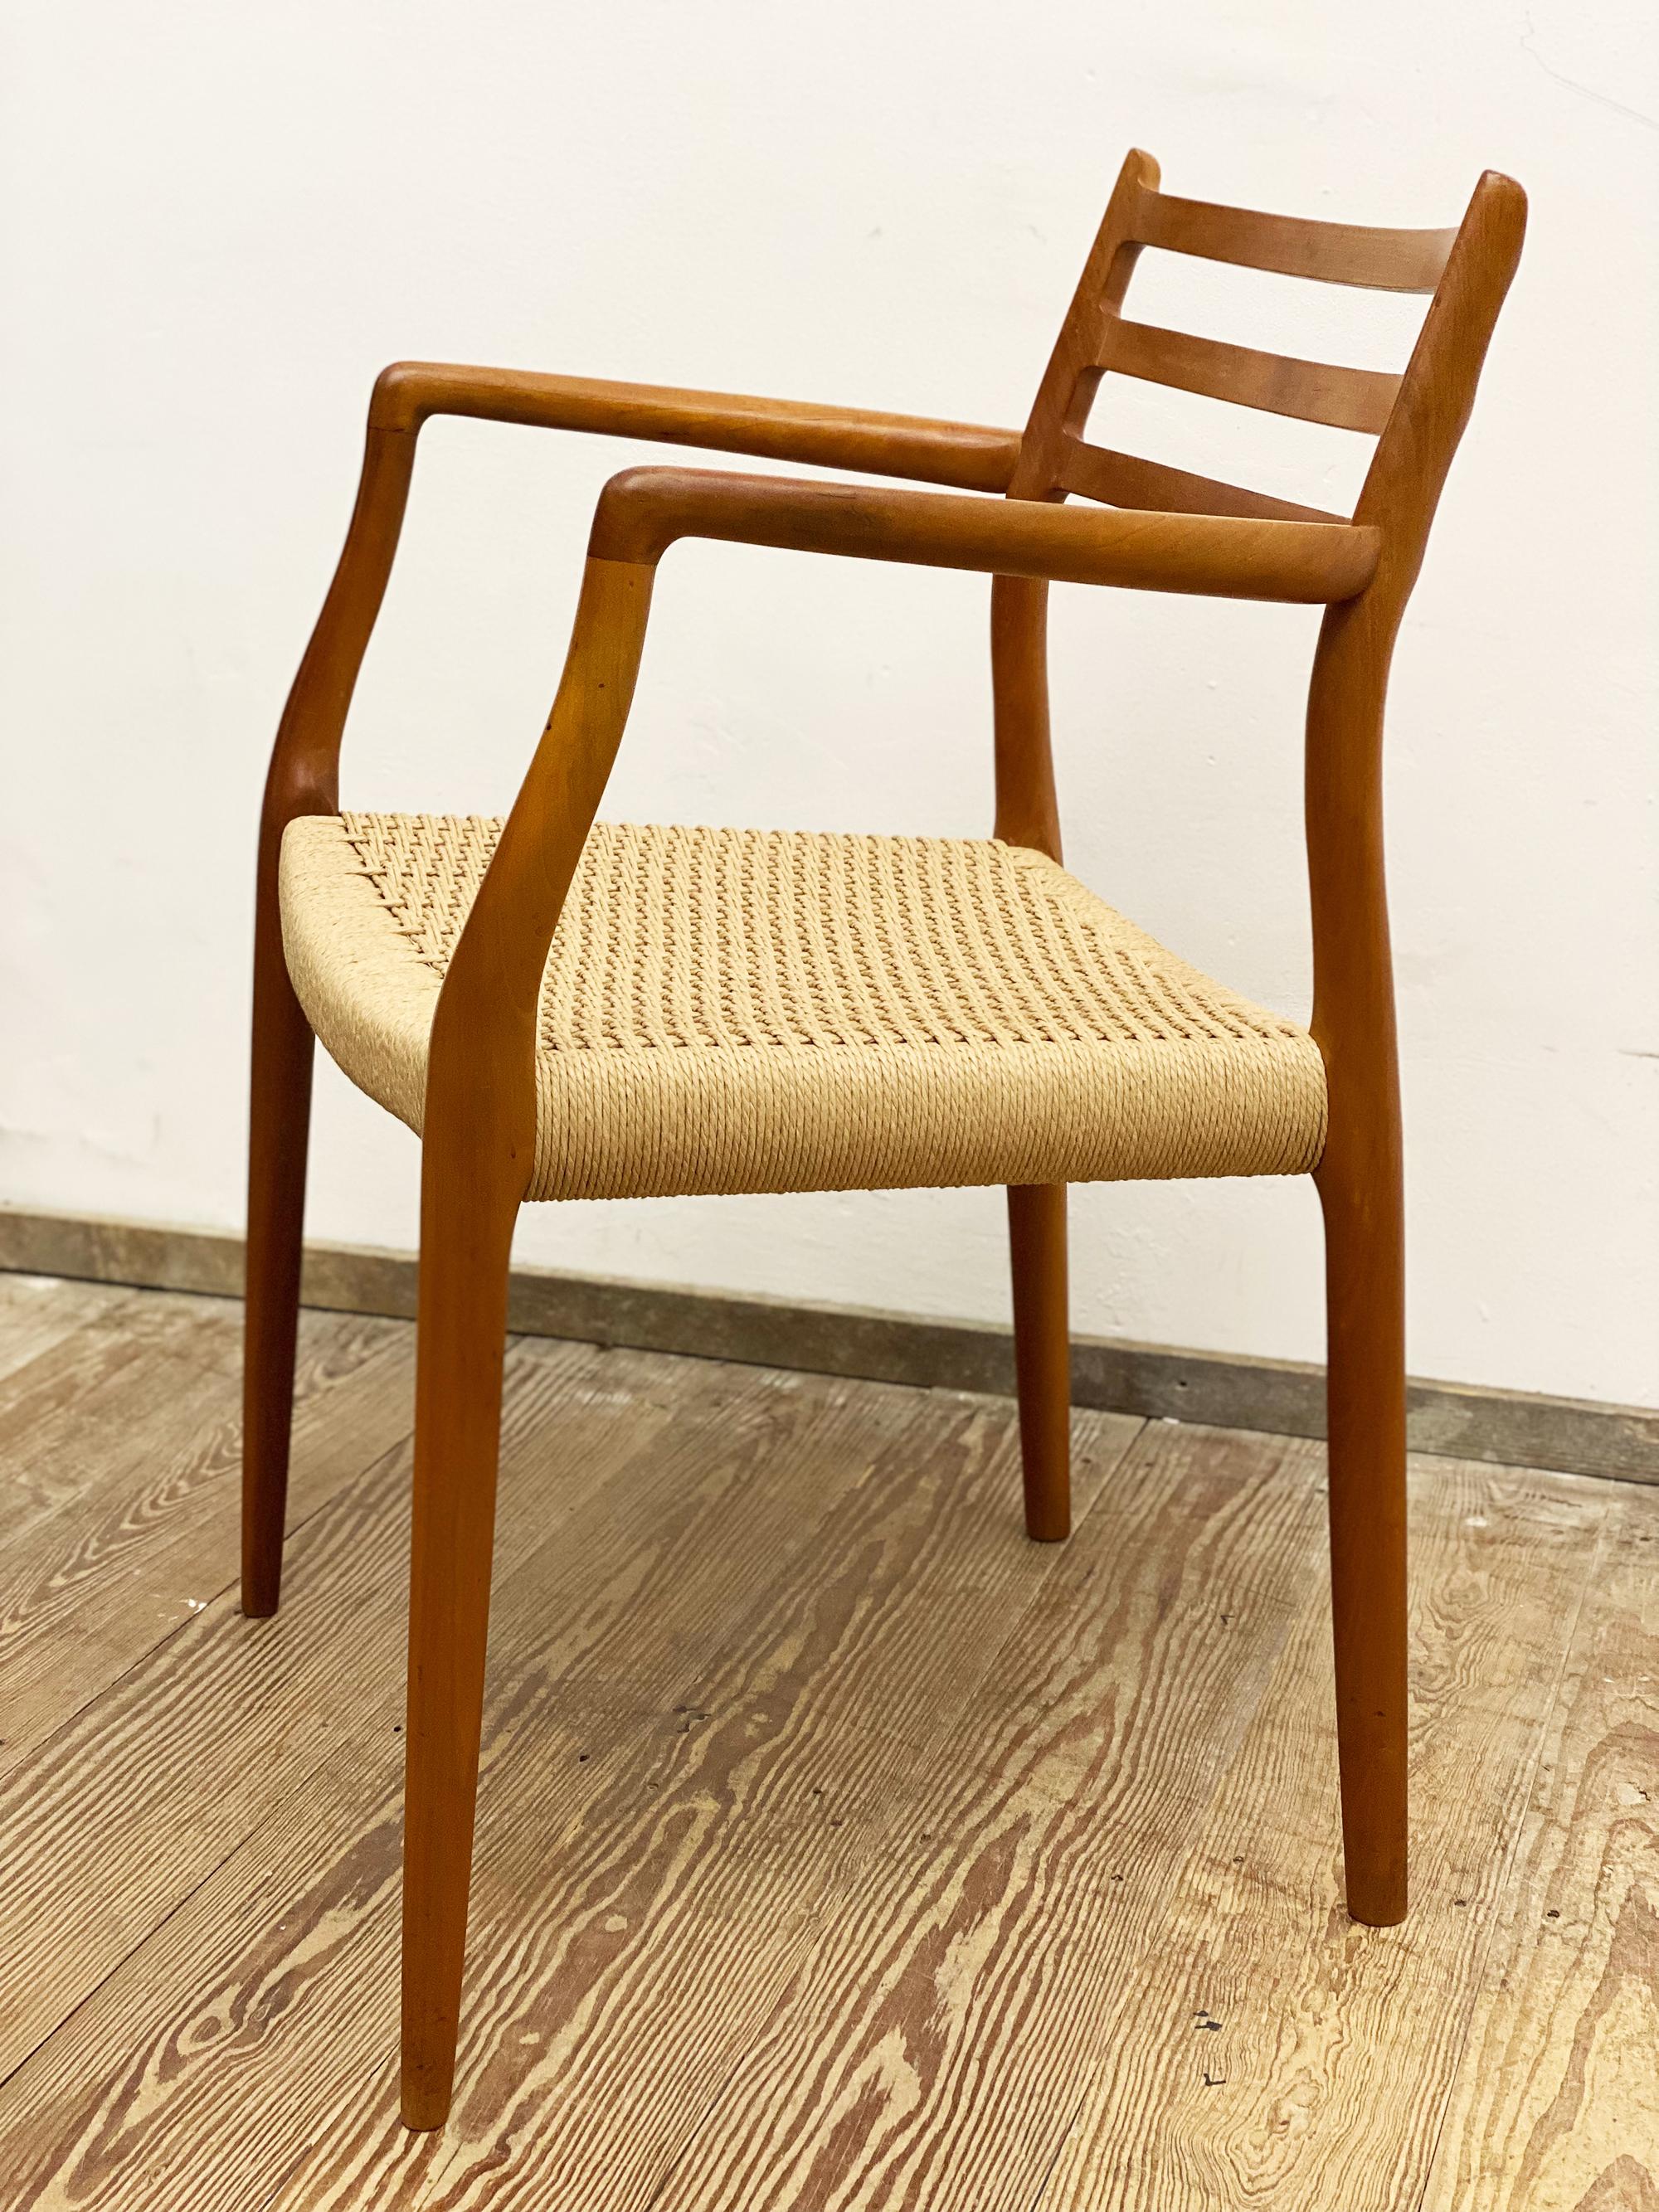 Hand-Carved 3 Mid-Century Teak Dining Chairs #62 by Niels O. Møller for J. L. Moller